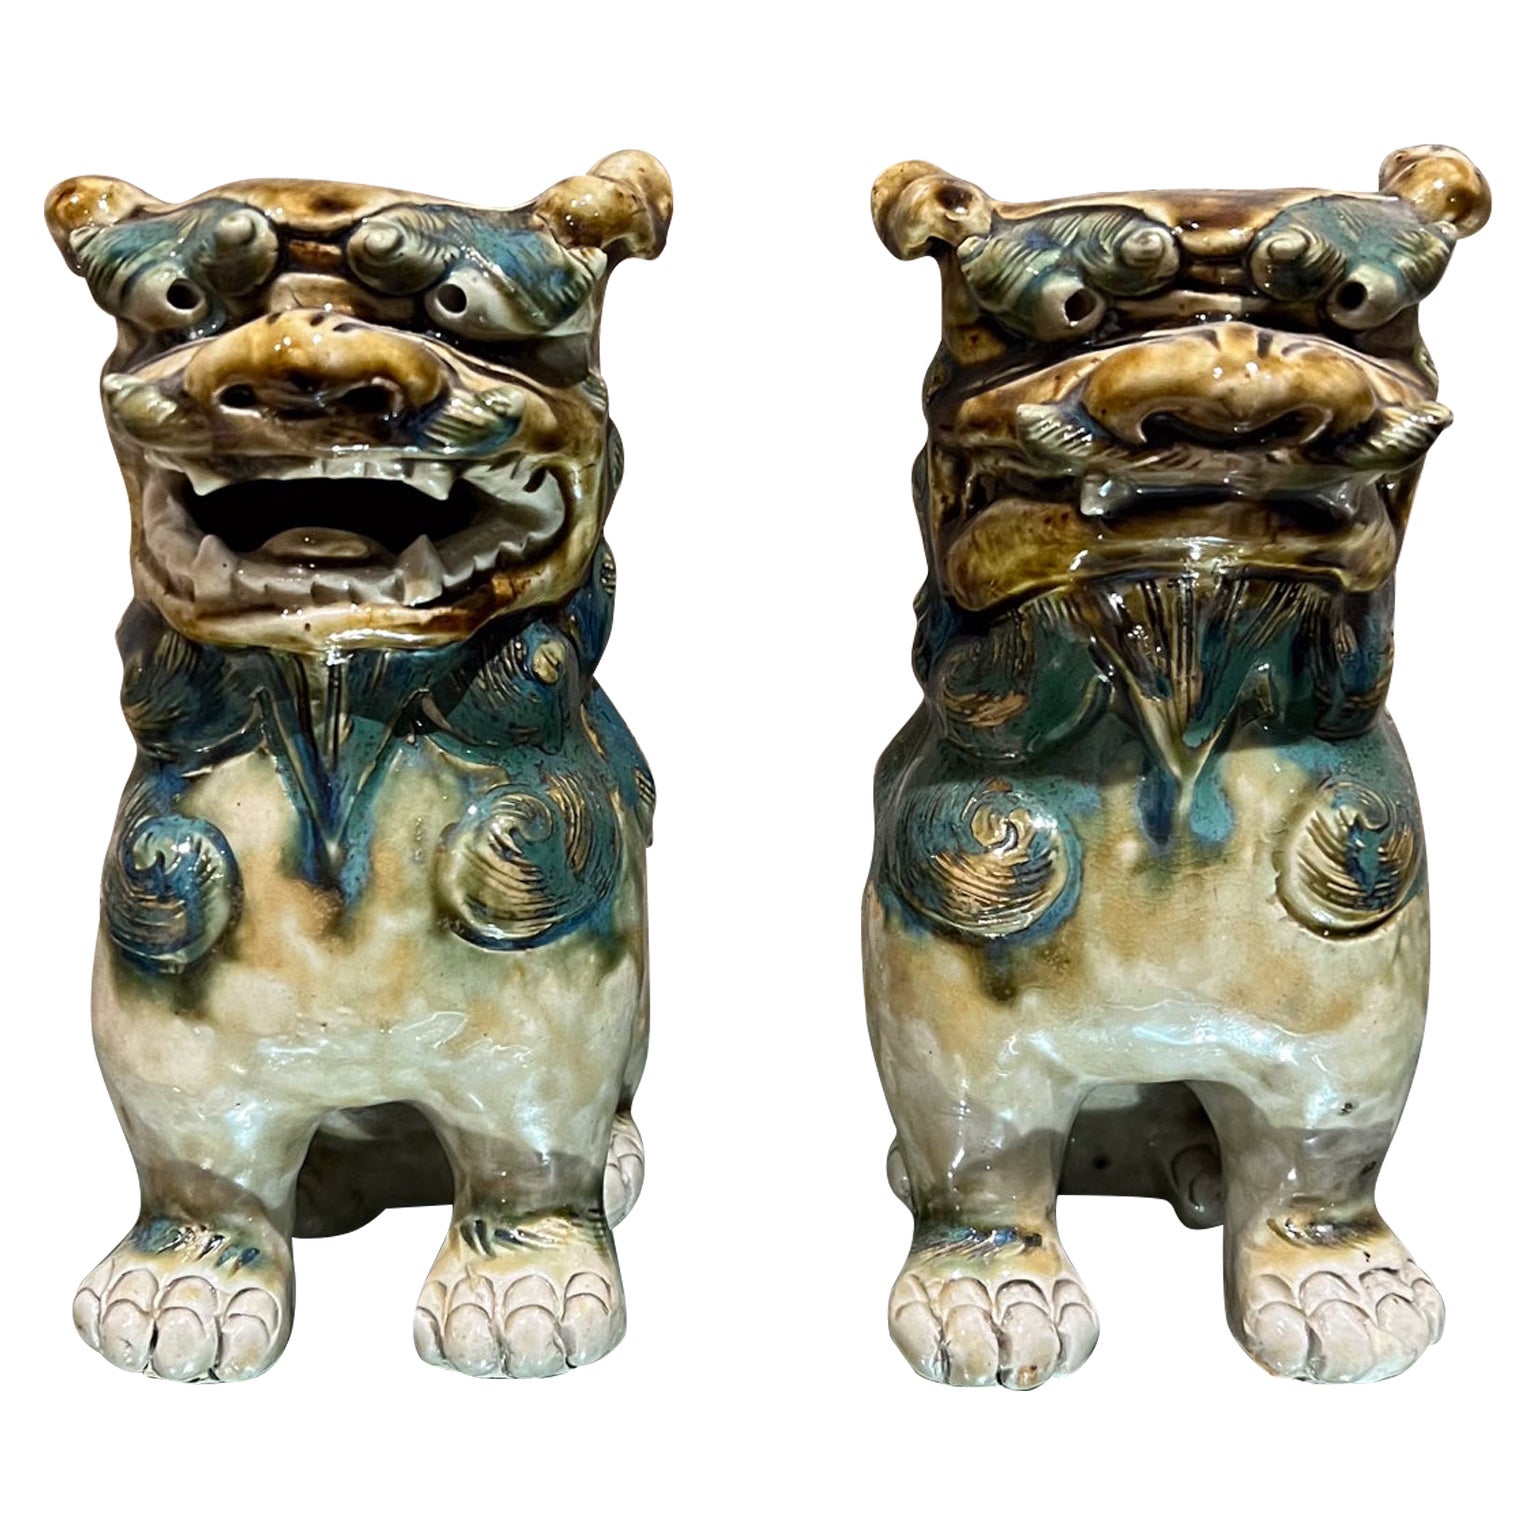 What are Chinese figurines called?